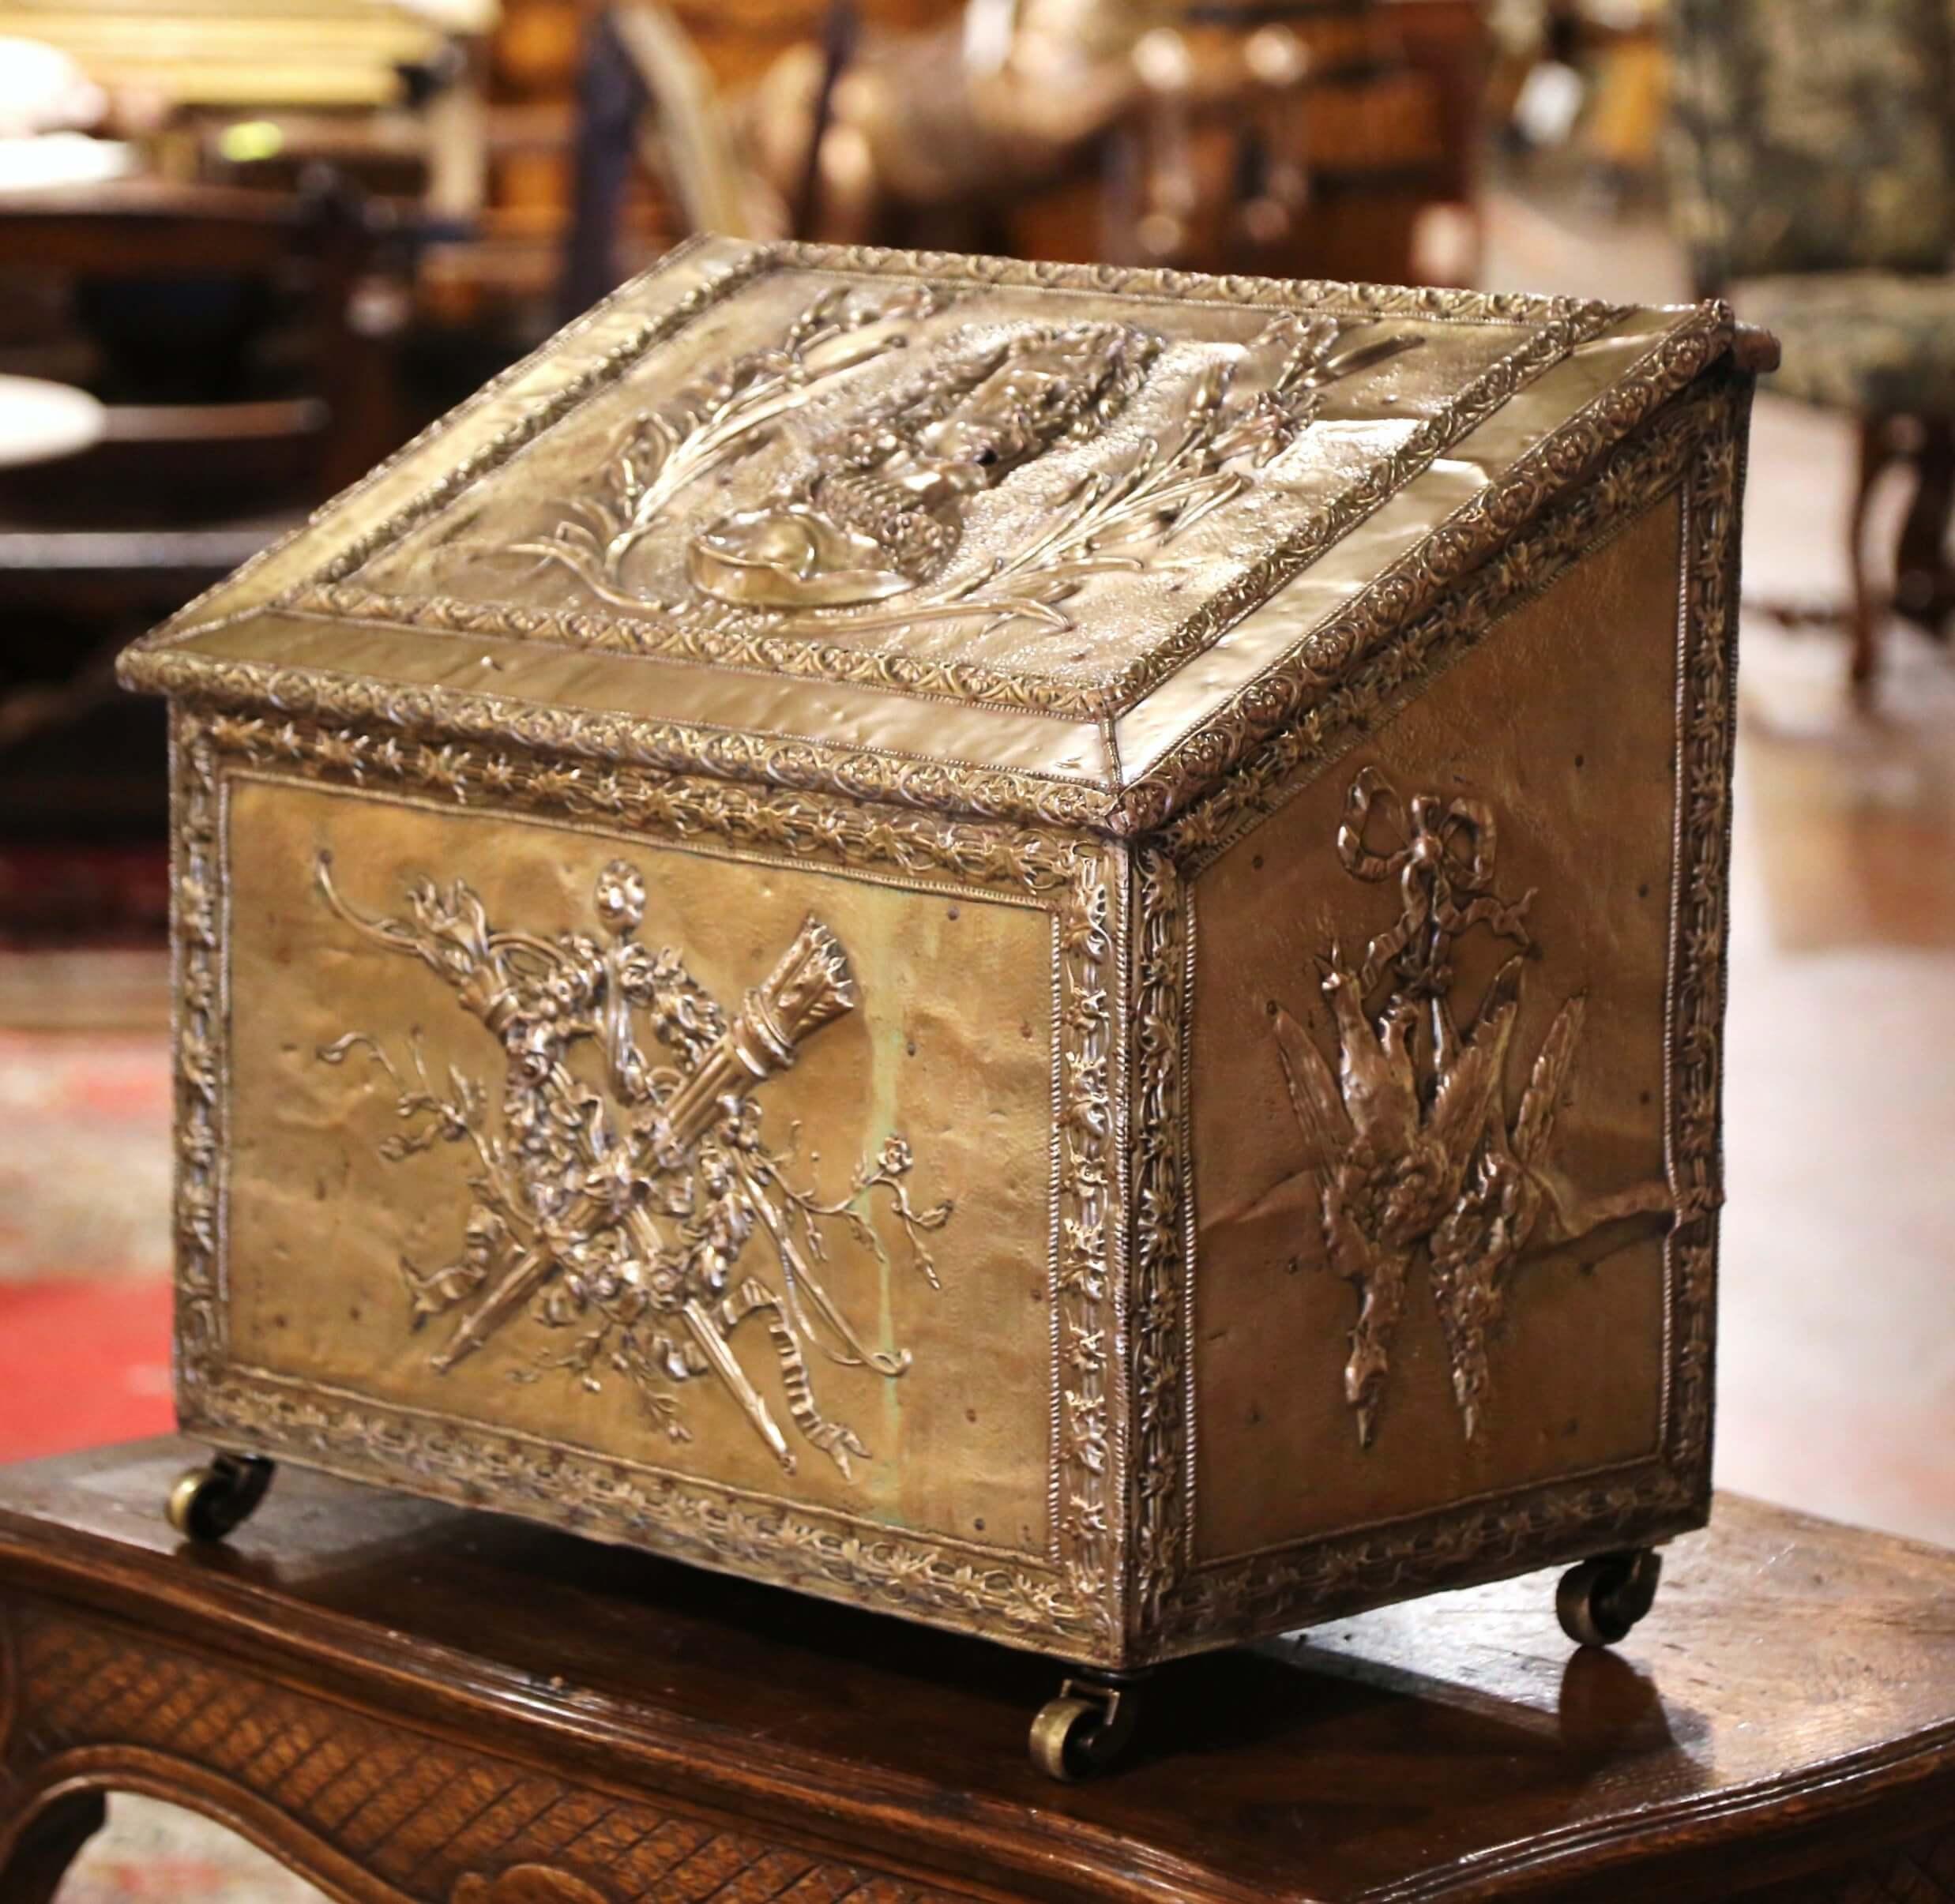 Crafted in France, circa 1870, the antique brass coffer is mounted on a wooden frame, and stands on caster wheels. The slant top opens up with stopping chain revealing inside storage. The large coal bin is decorated with repousse hunting motifs on